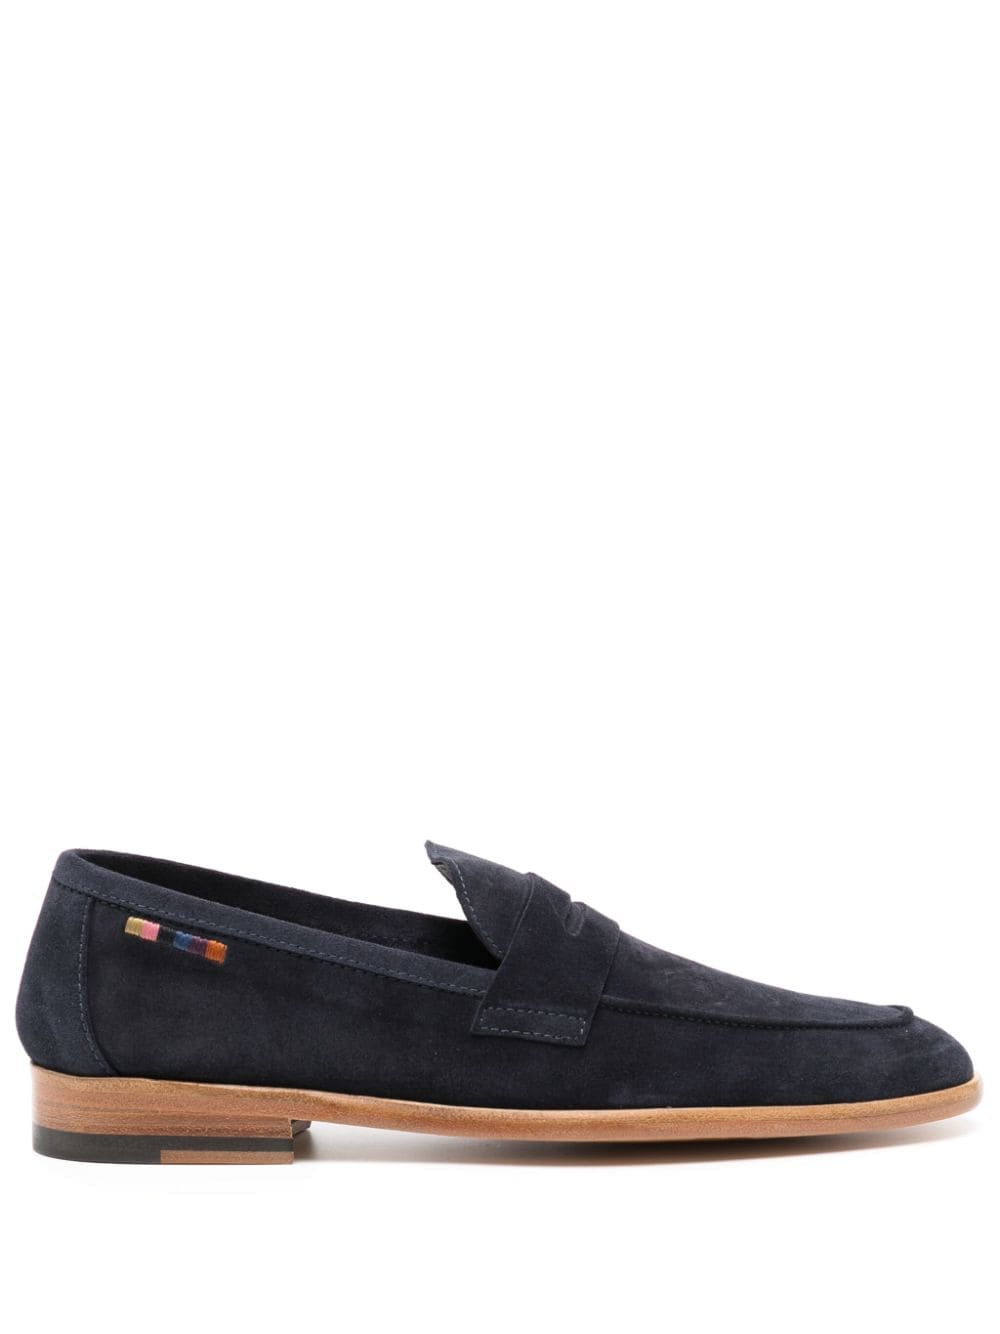 Paul Smith Figaro suede loafers - Blue von Paul Smith